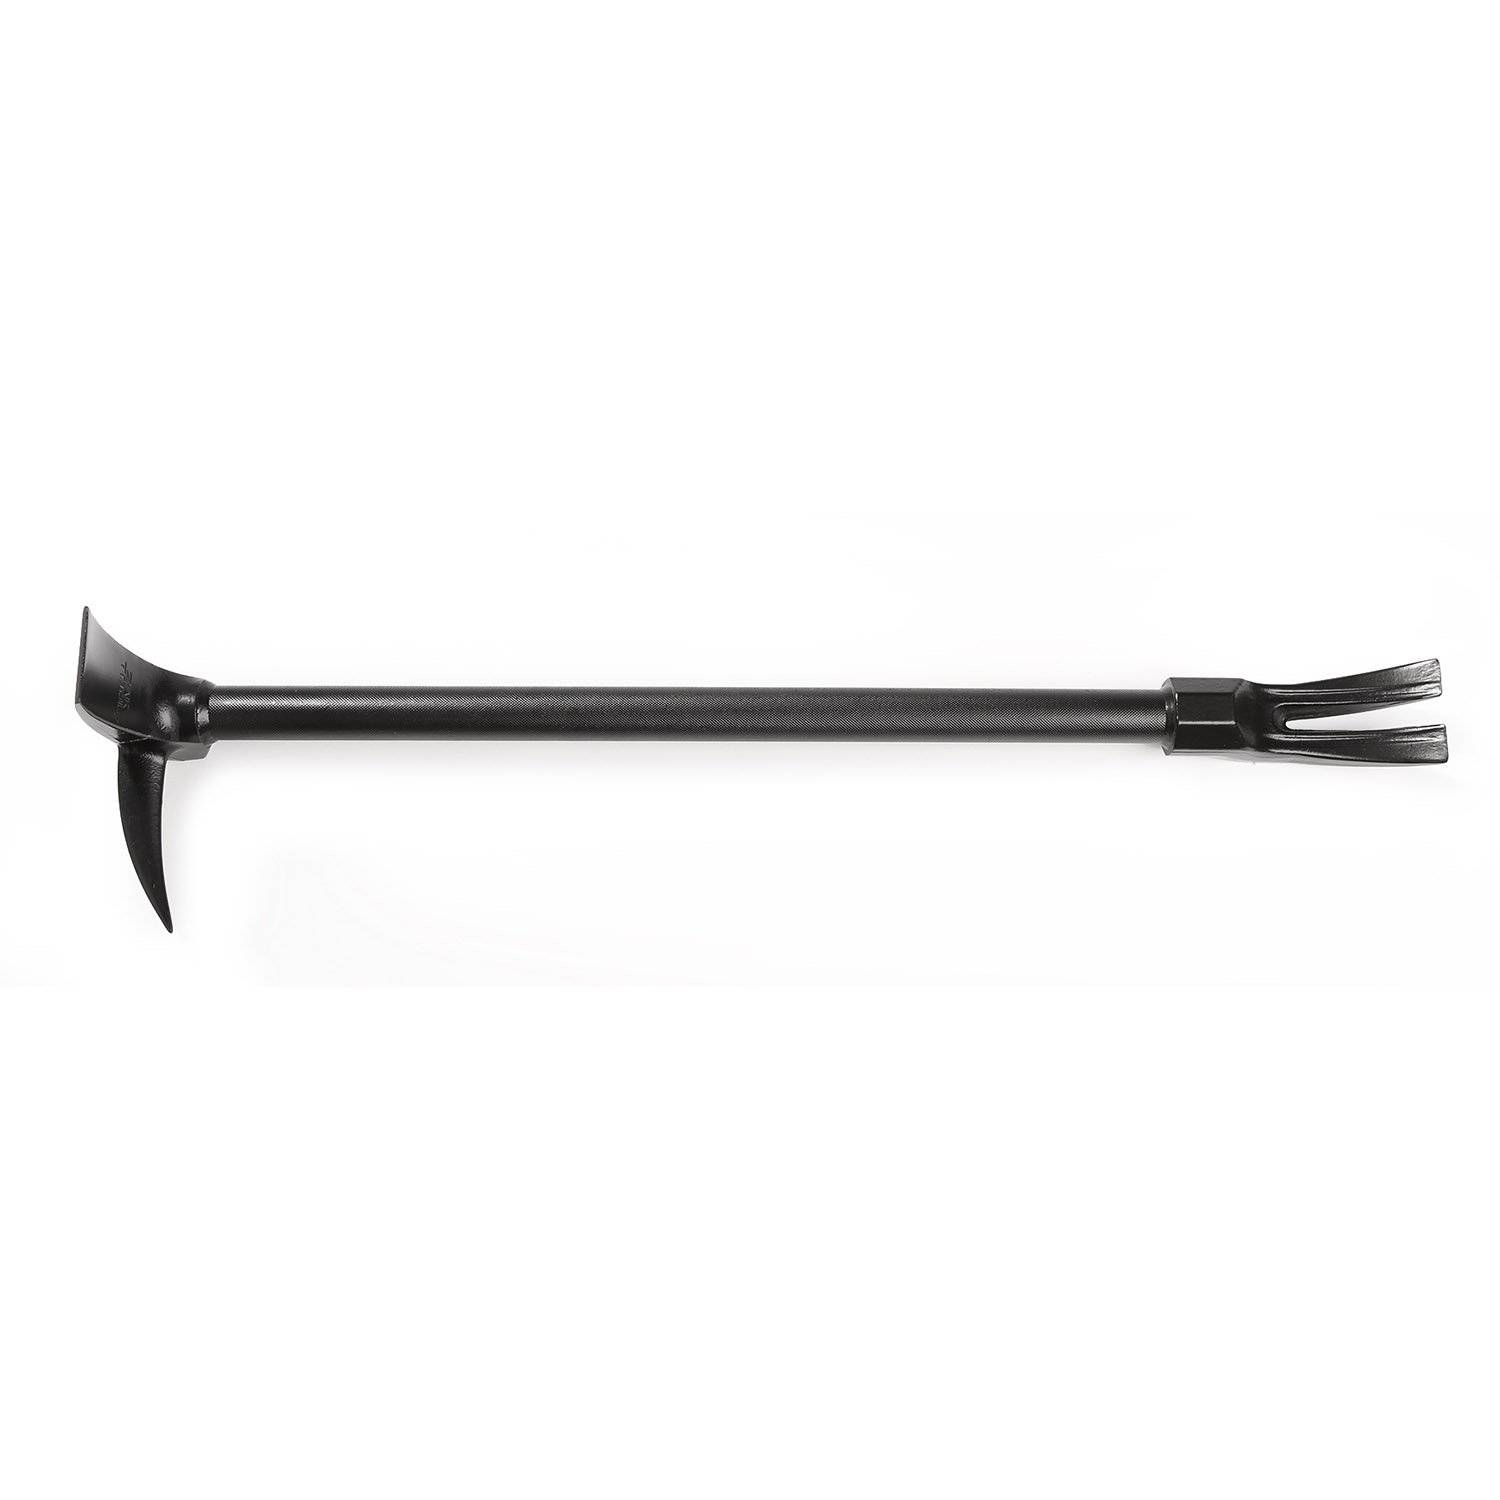 ZAK TOOL TACTICAL ENTRY TOOL HALLIGAN ZT41-36 ALL BLACK FOR POLICE FIREFIGHTER 